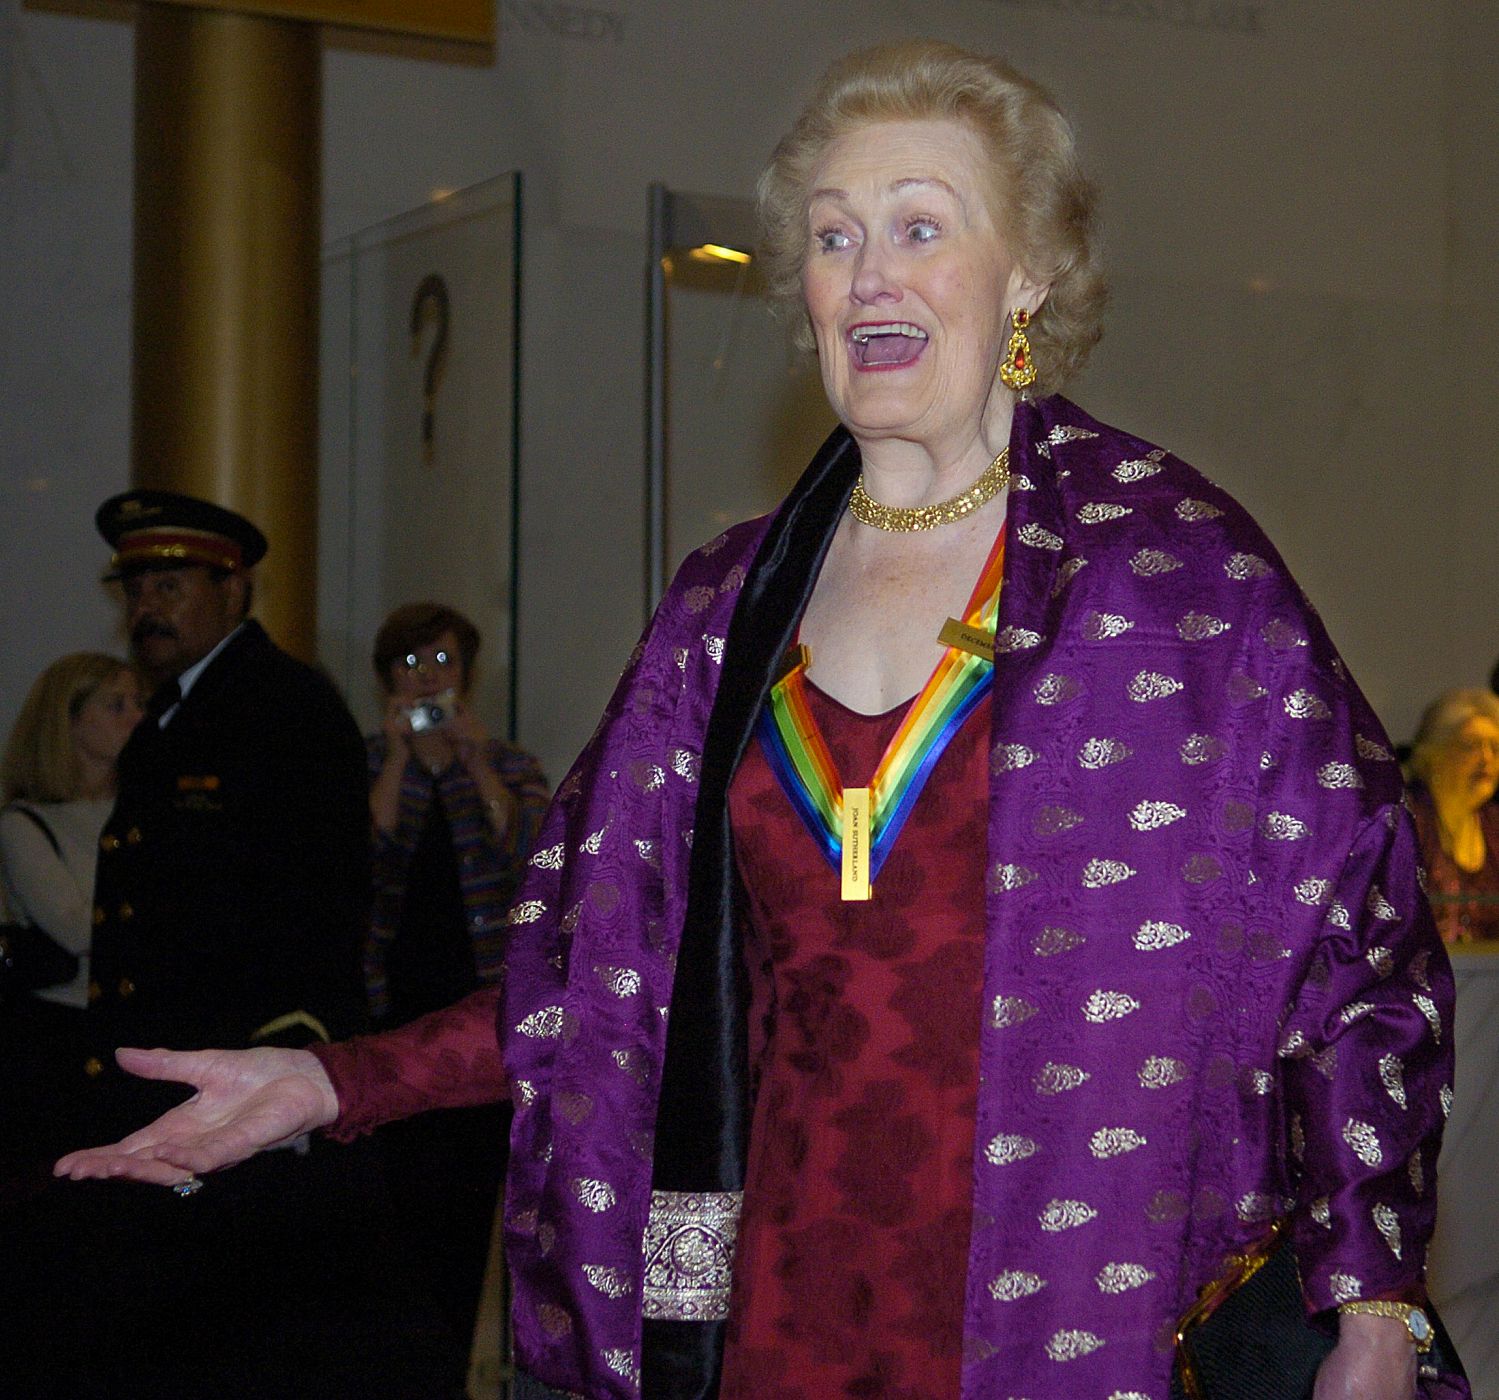 2004 Honoree Joan Sutherland arrives for Kennedy Center Honors gala performance.